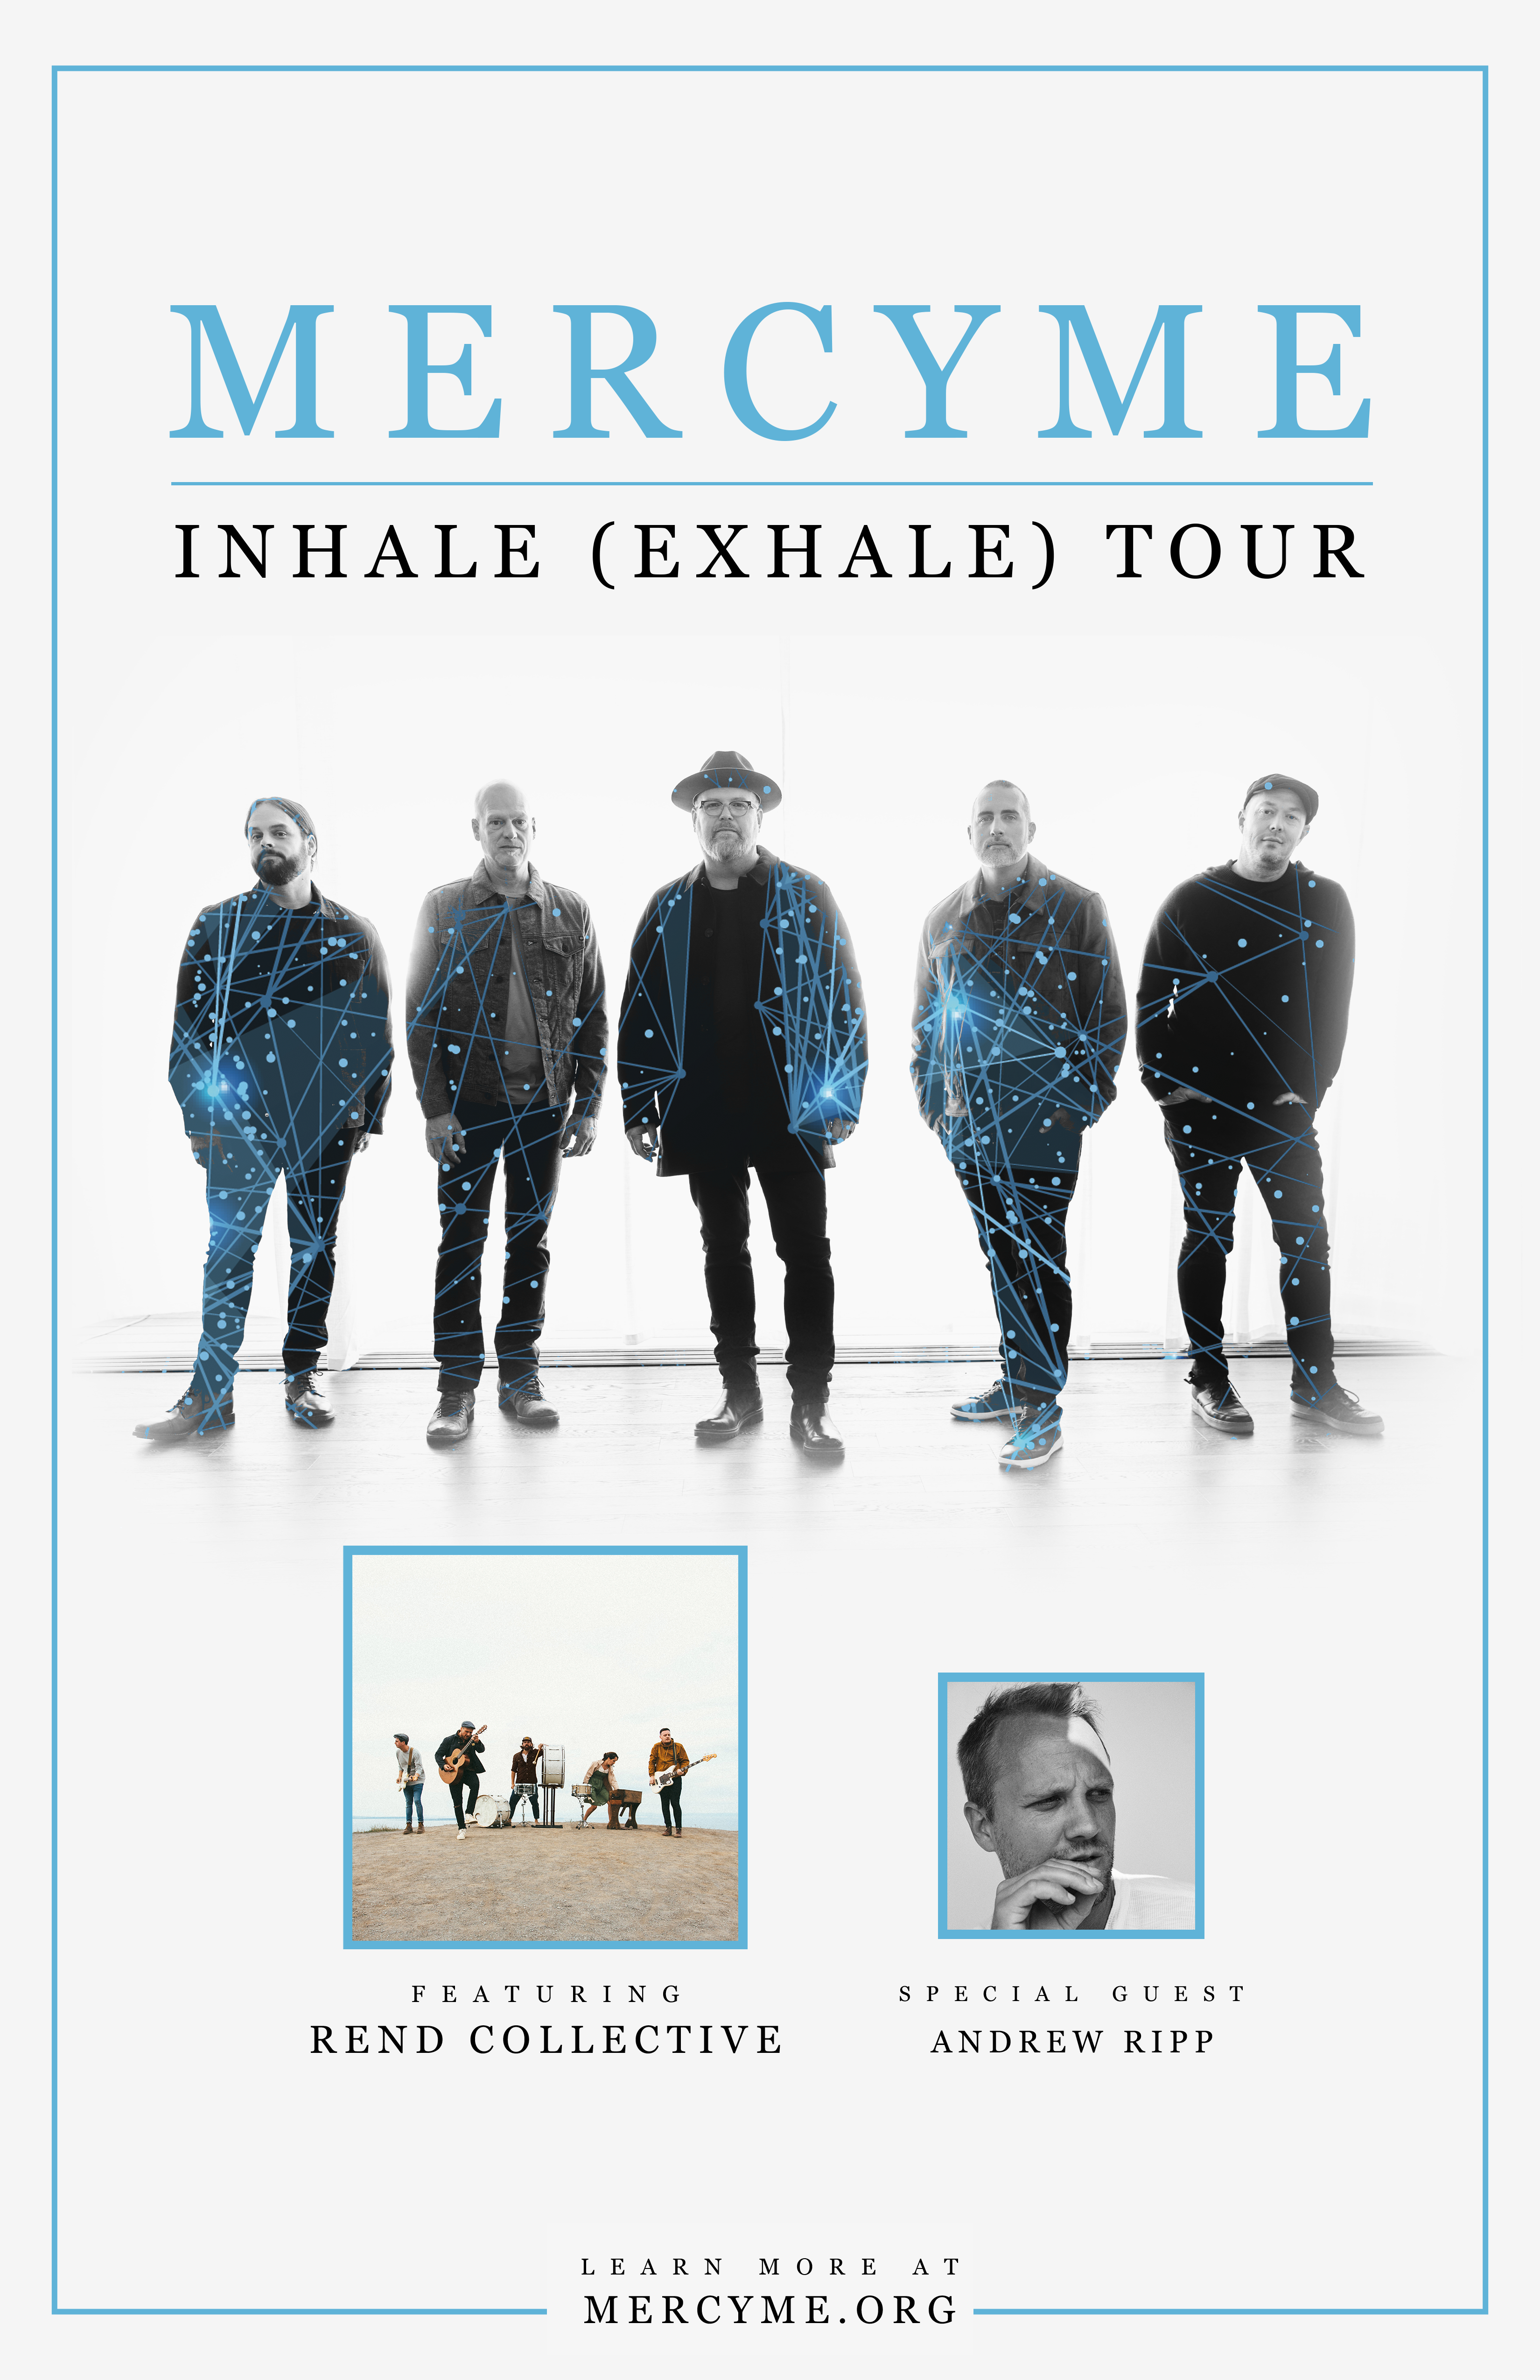 Mercy Me Concert Schedule 2022 Mercyme Inhale (Exhale) Tour Featuring Rend Collective | Shine 104.9